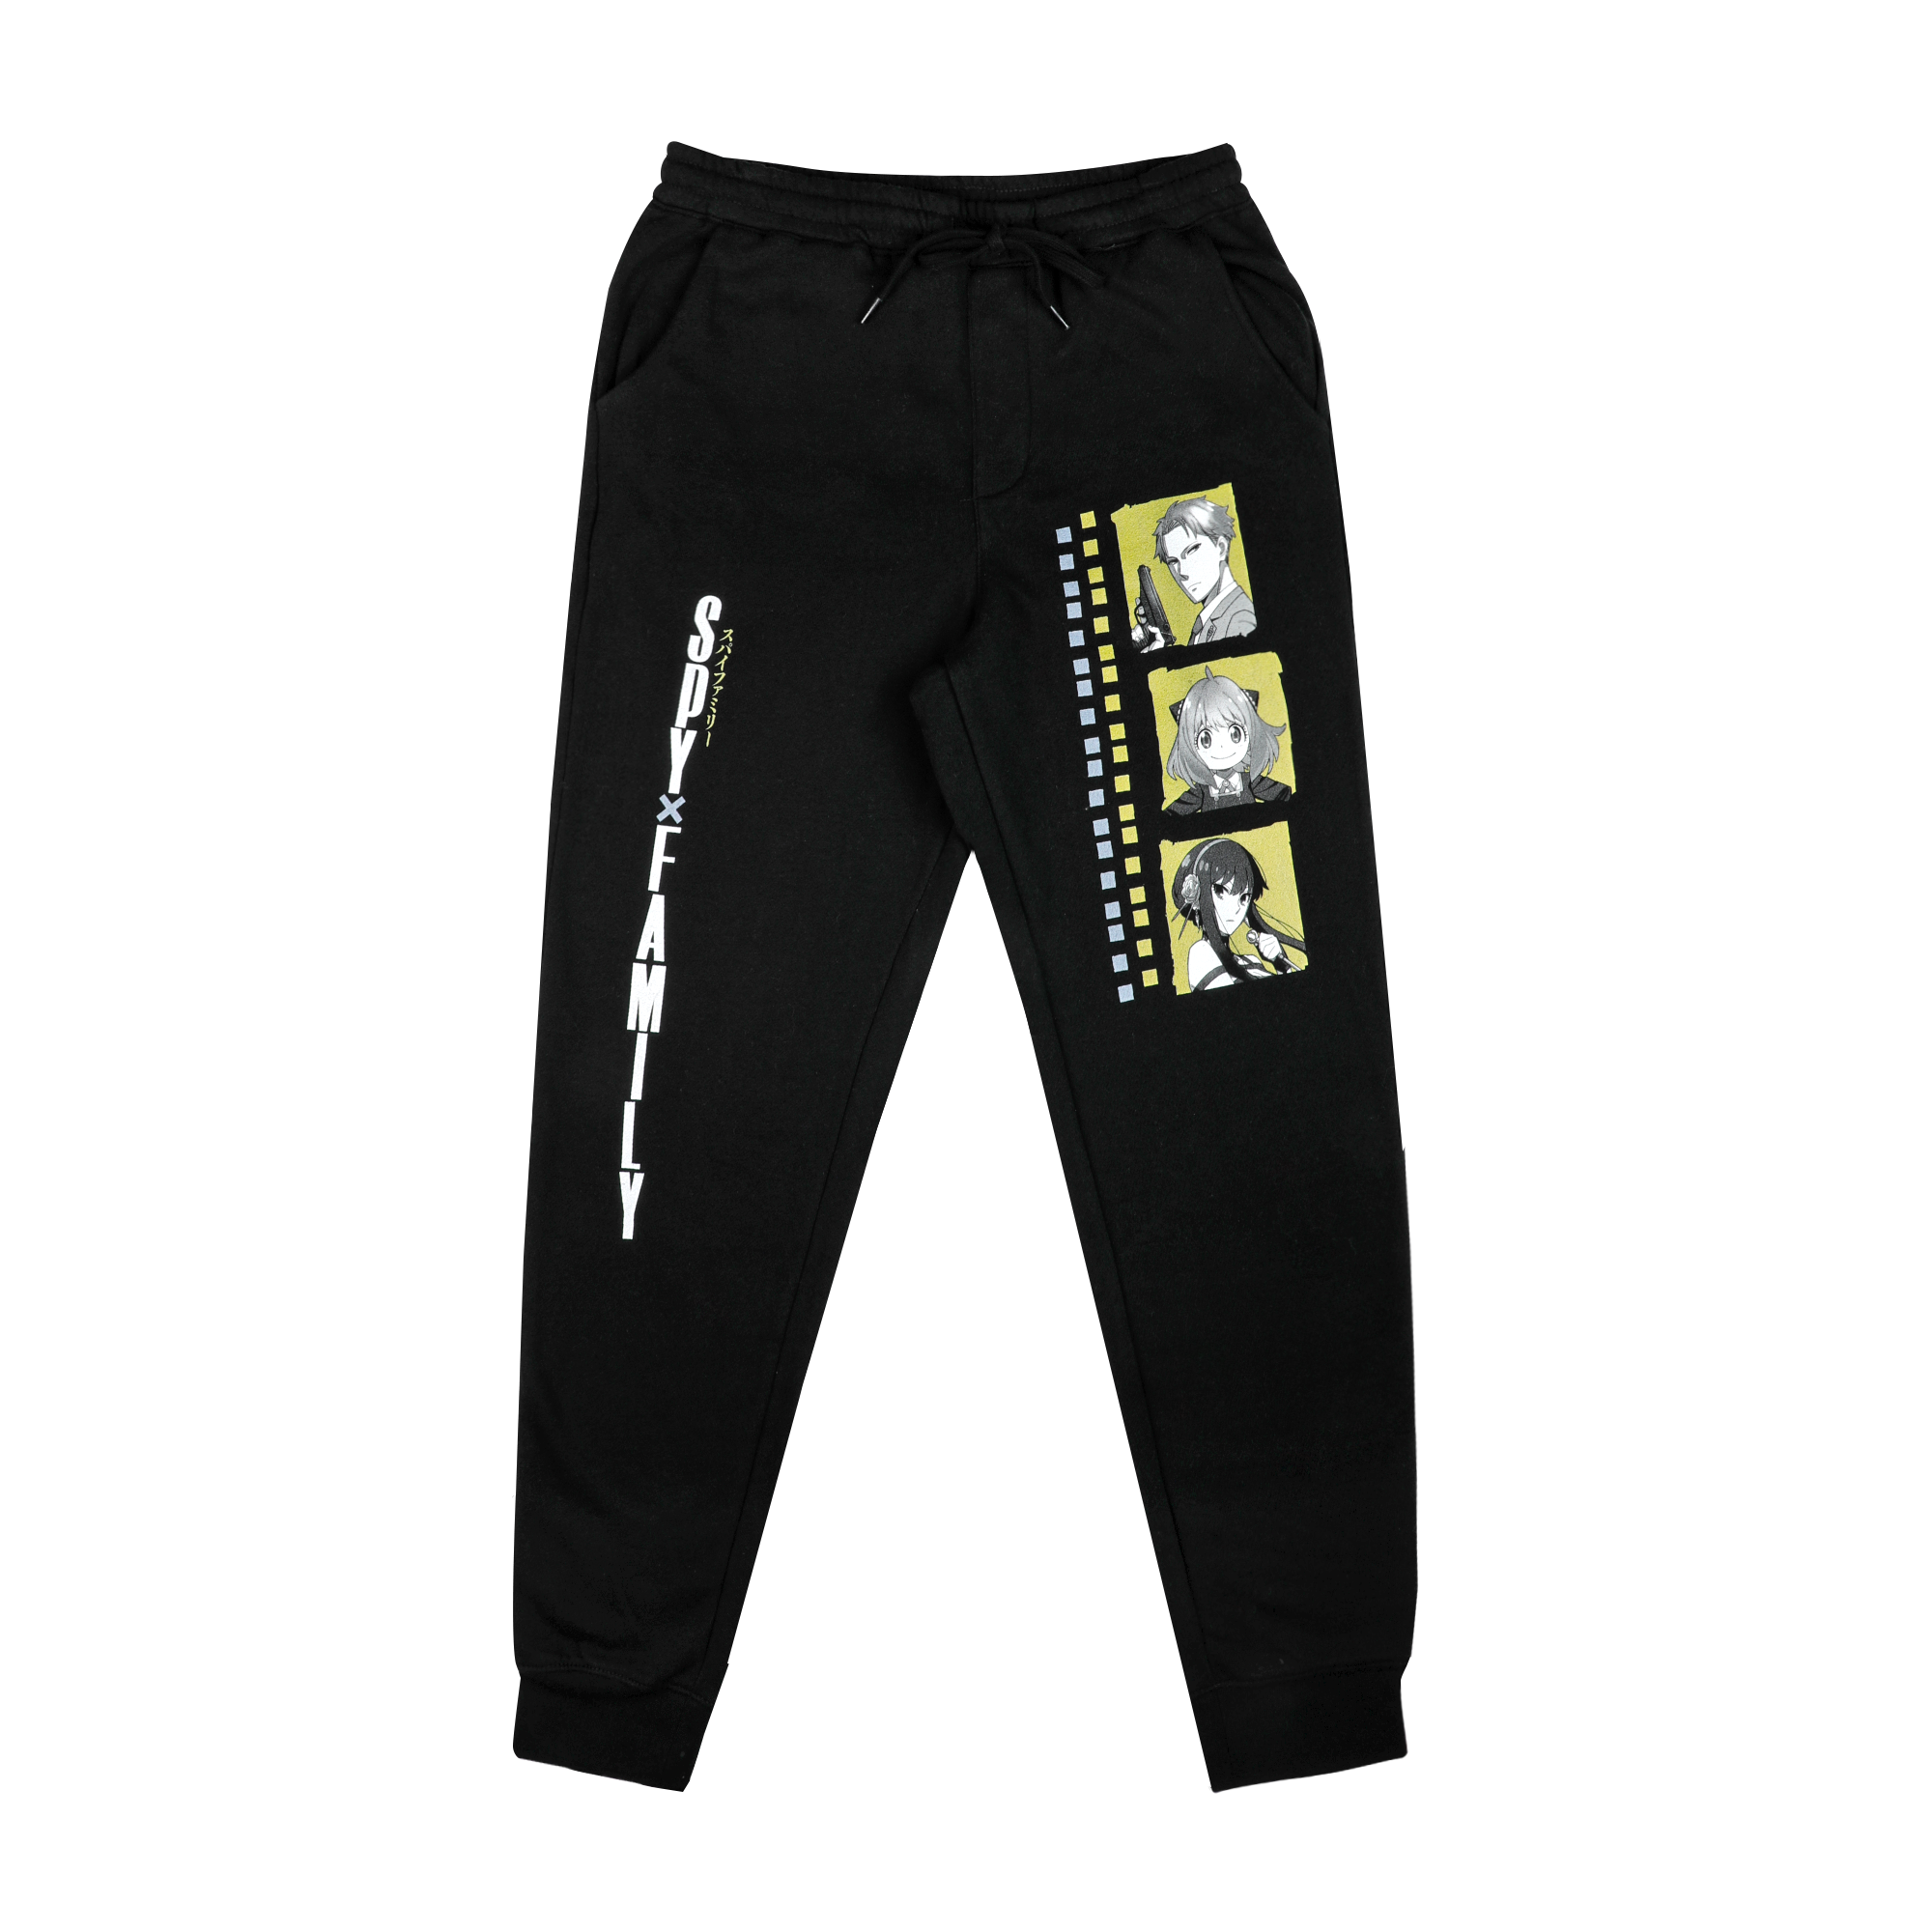 The Forgers Black Joggers